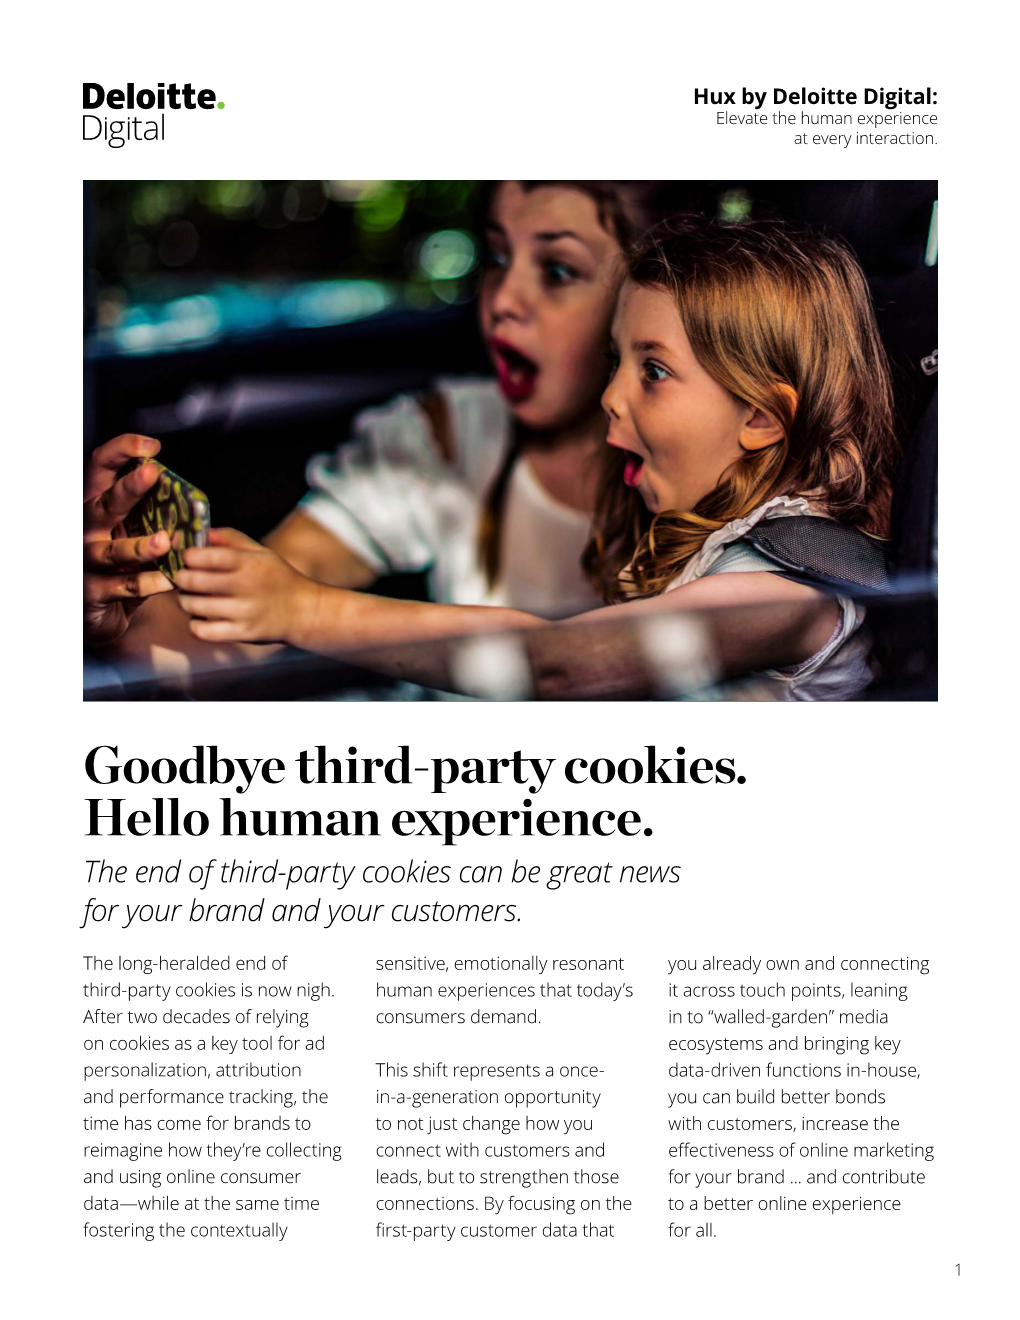 Goodbye Third-Party Cookies. Hello Human Experience. the End of Third-Party Cookies Can Be Great News for Your Brand and Your Customers